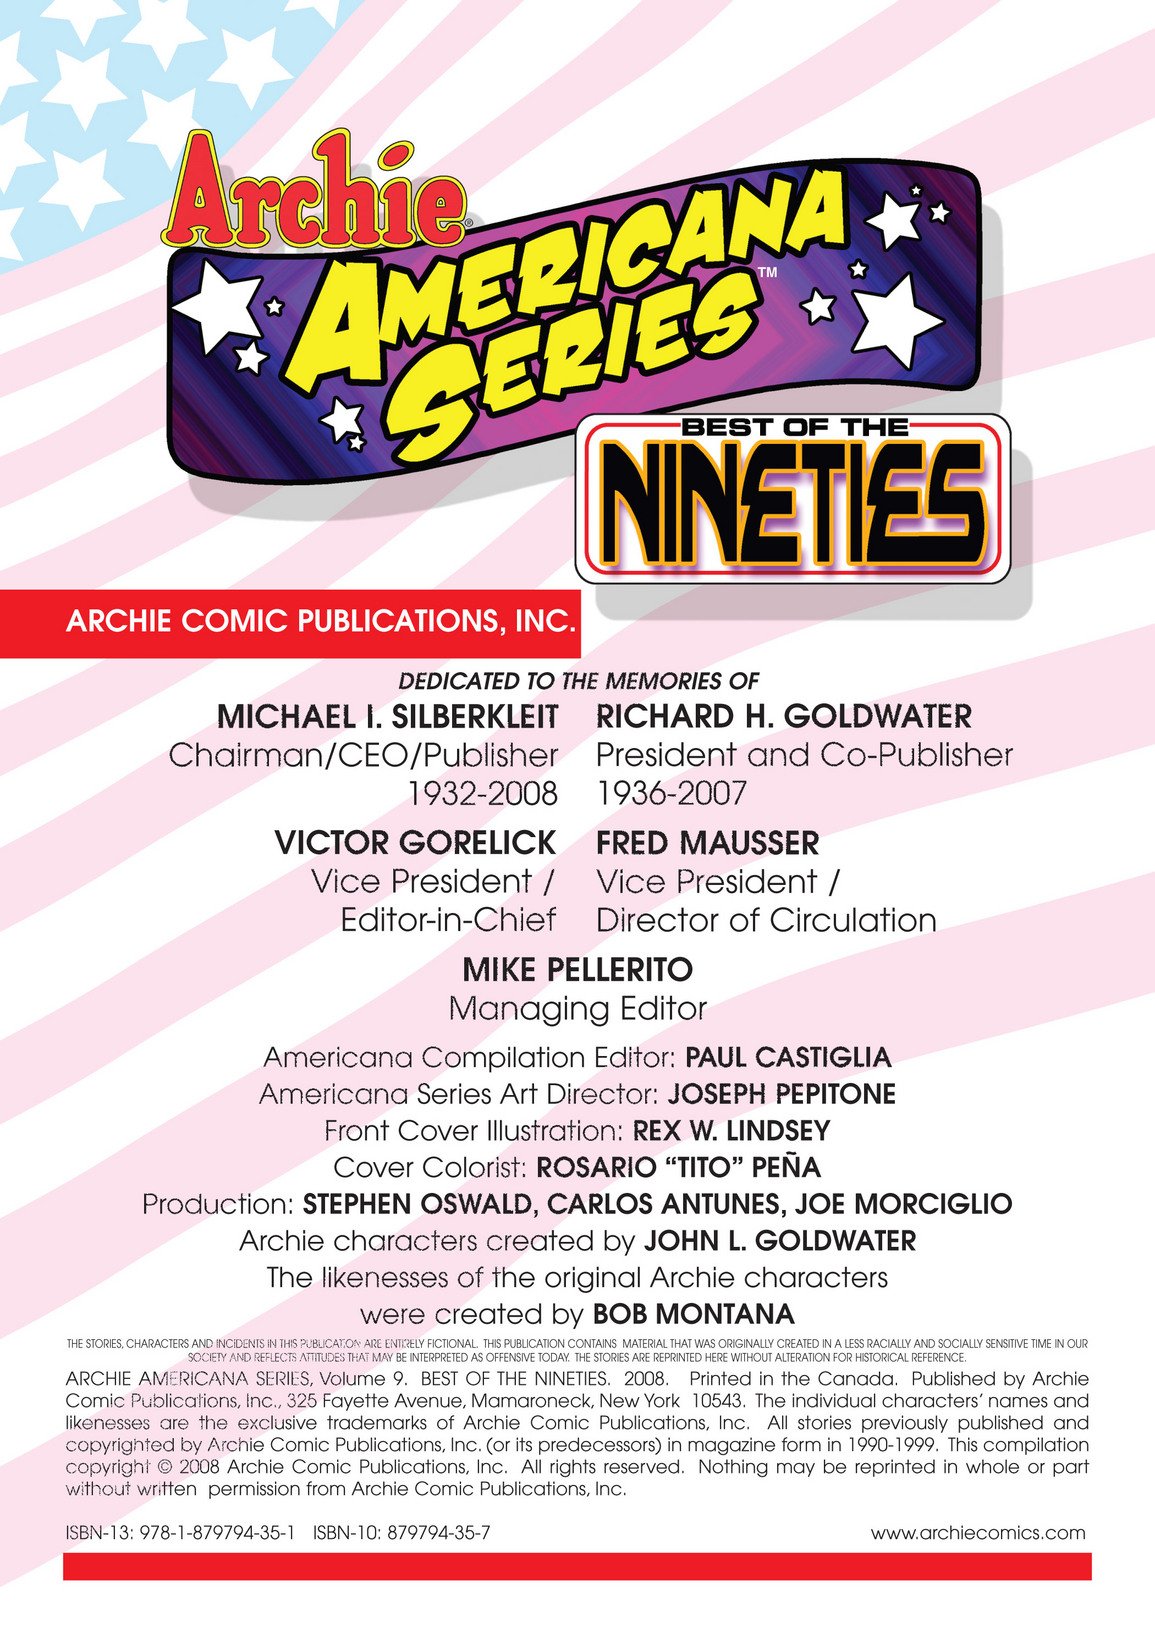 Read online Archie Americana Series comic -  Issue # TPB 9 - 3